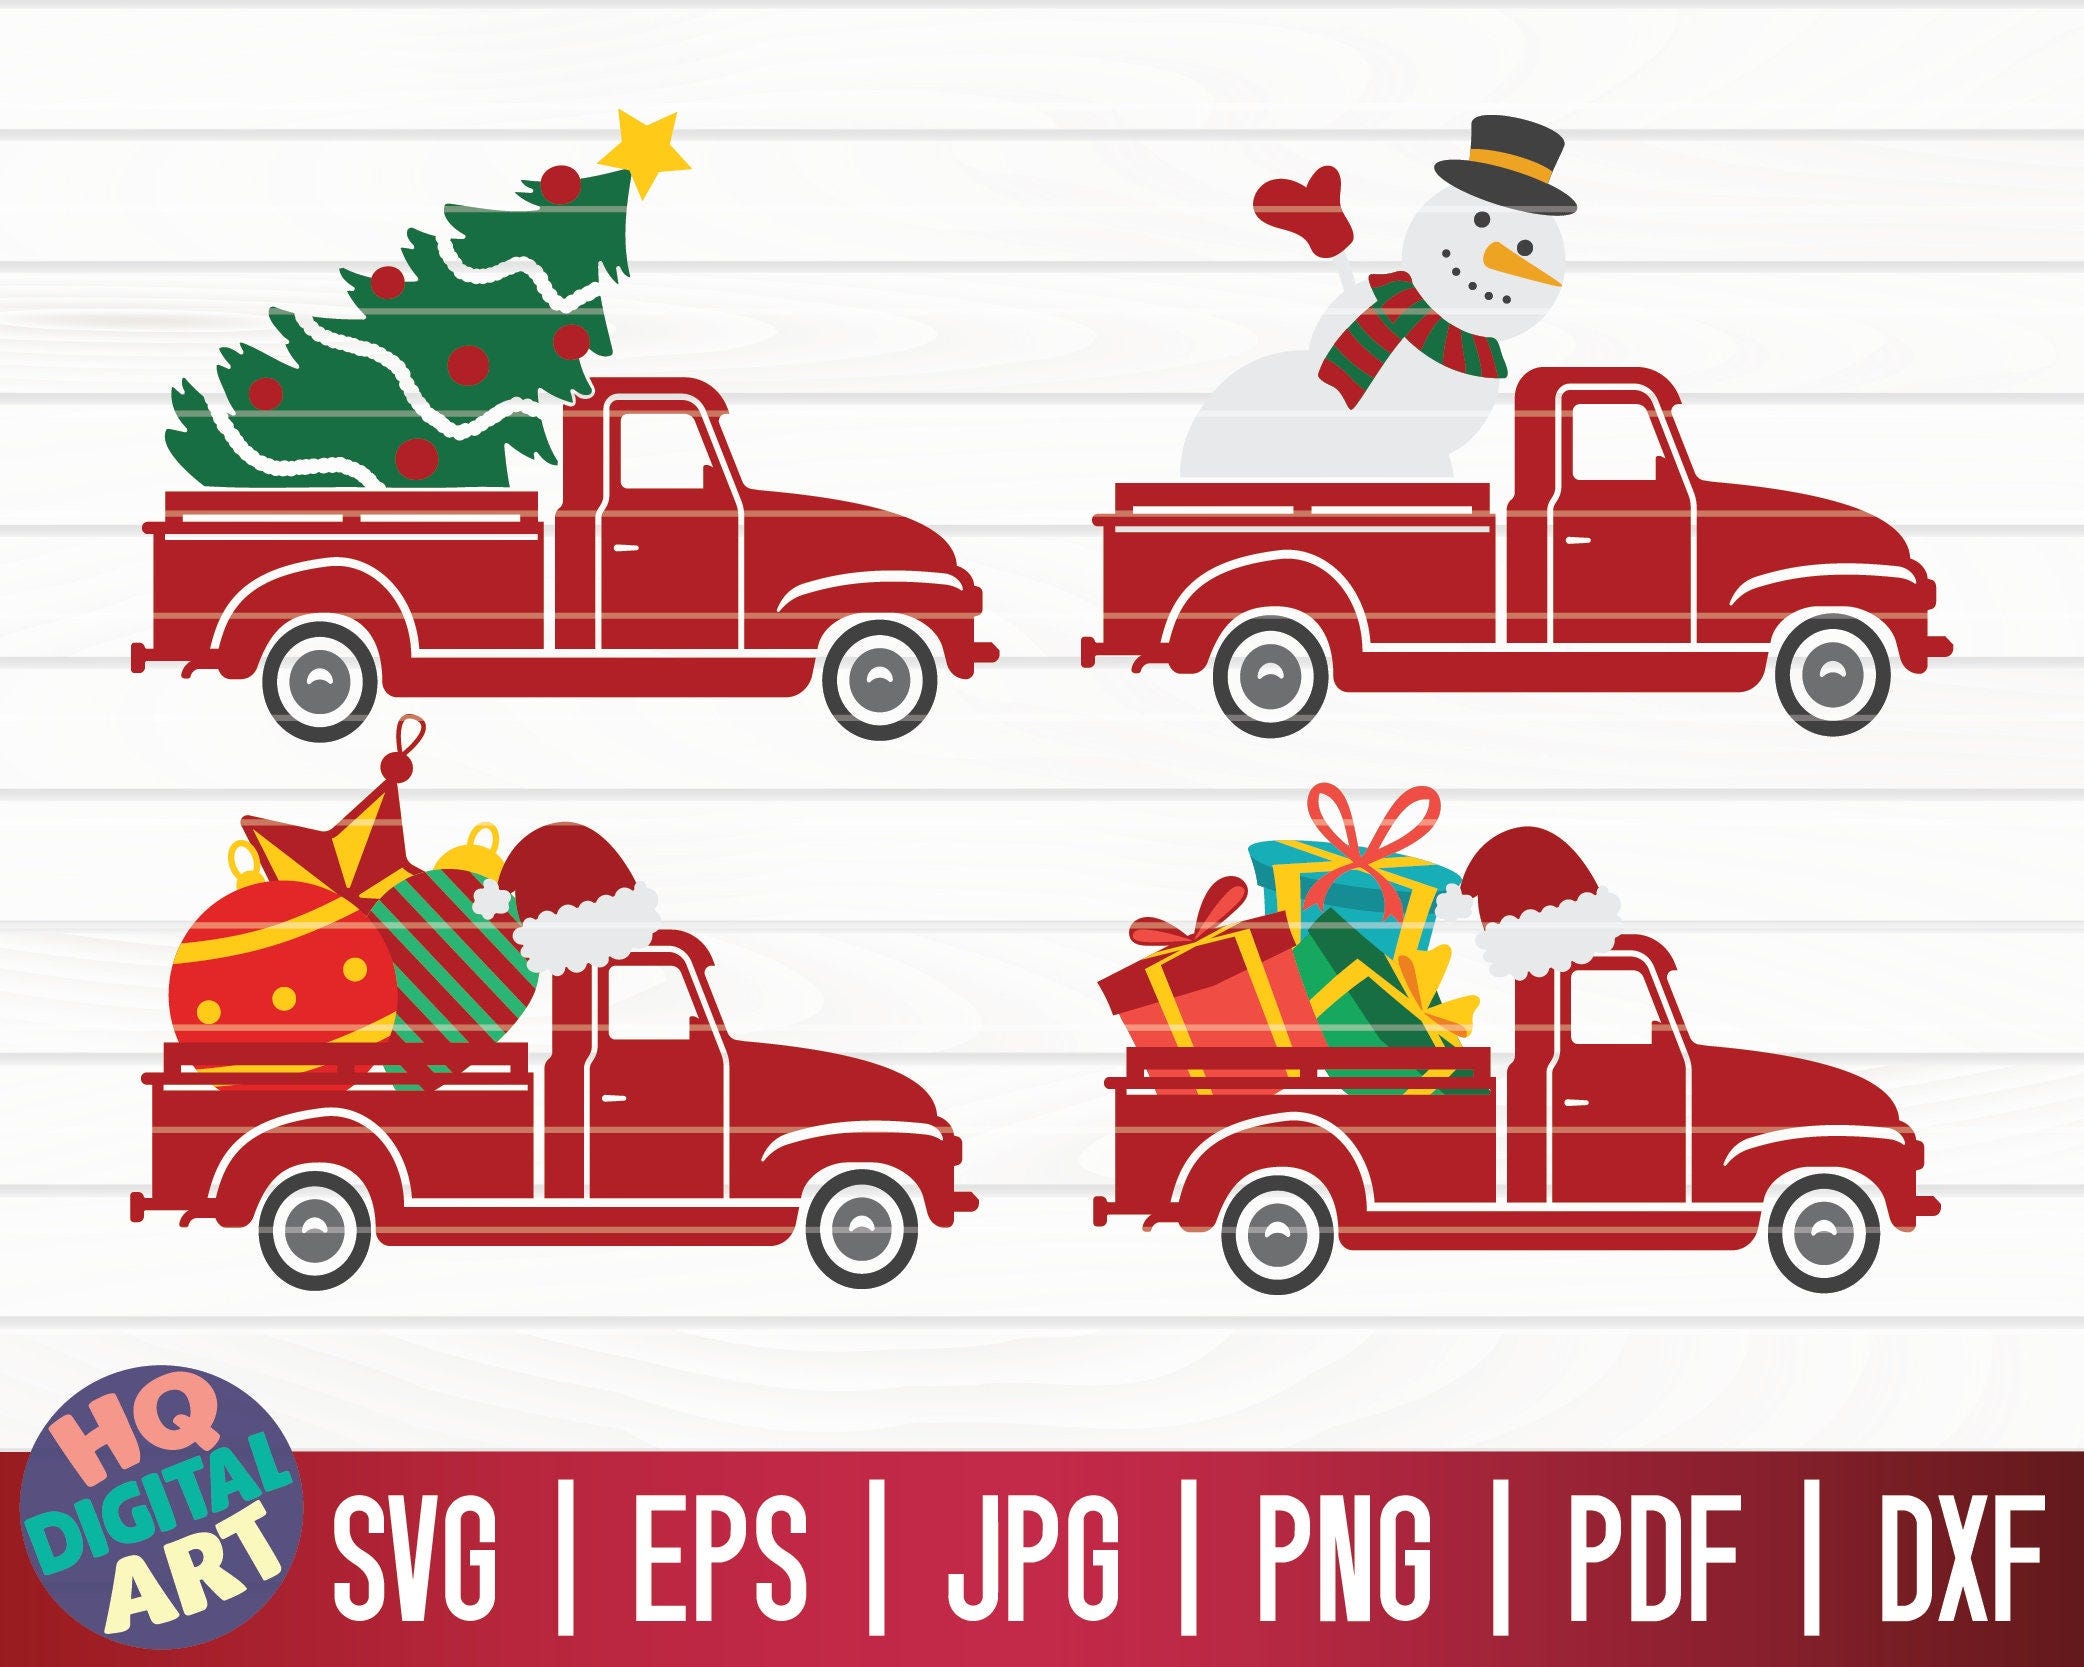 4 Christmas Trucks SVG Bundle with Gifts, Globes, Snowman, Christmas Tree / Cut File / cliparts / printable / vectors / commercial use